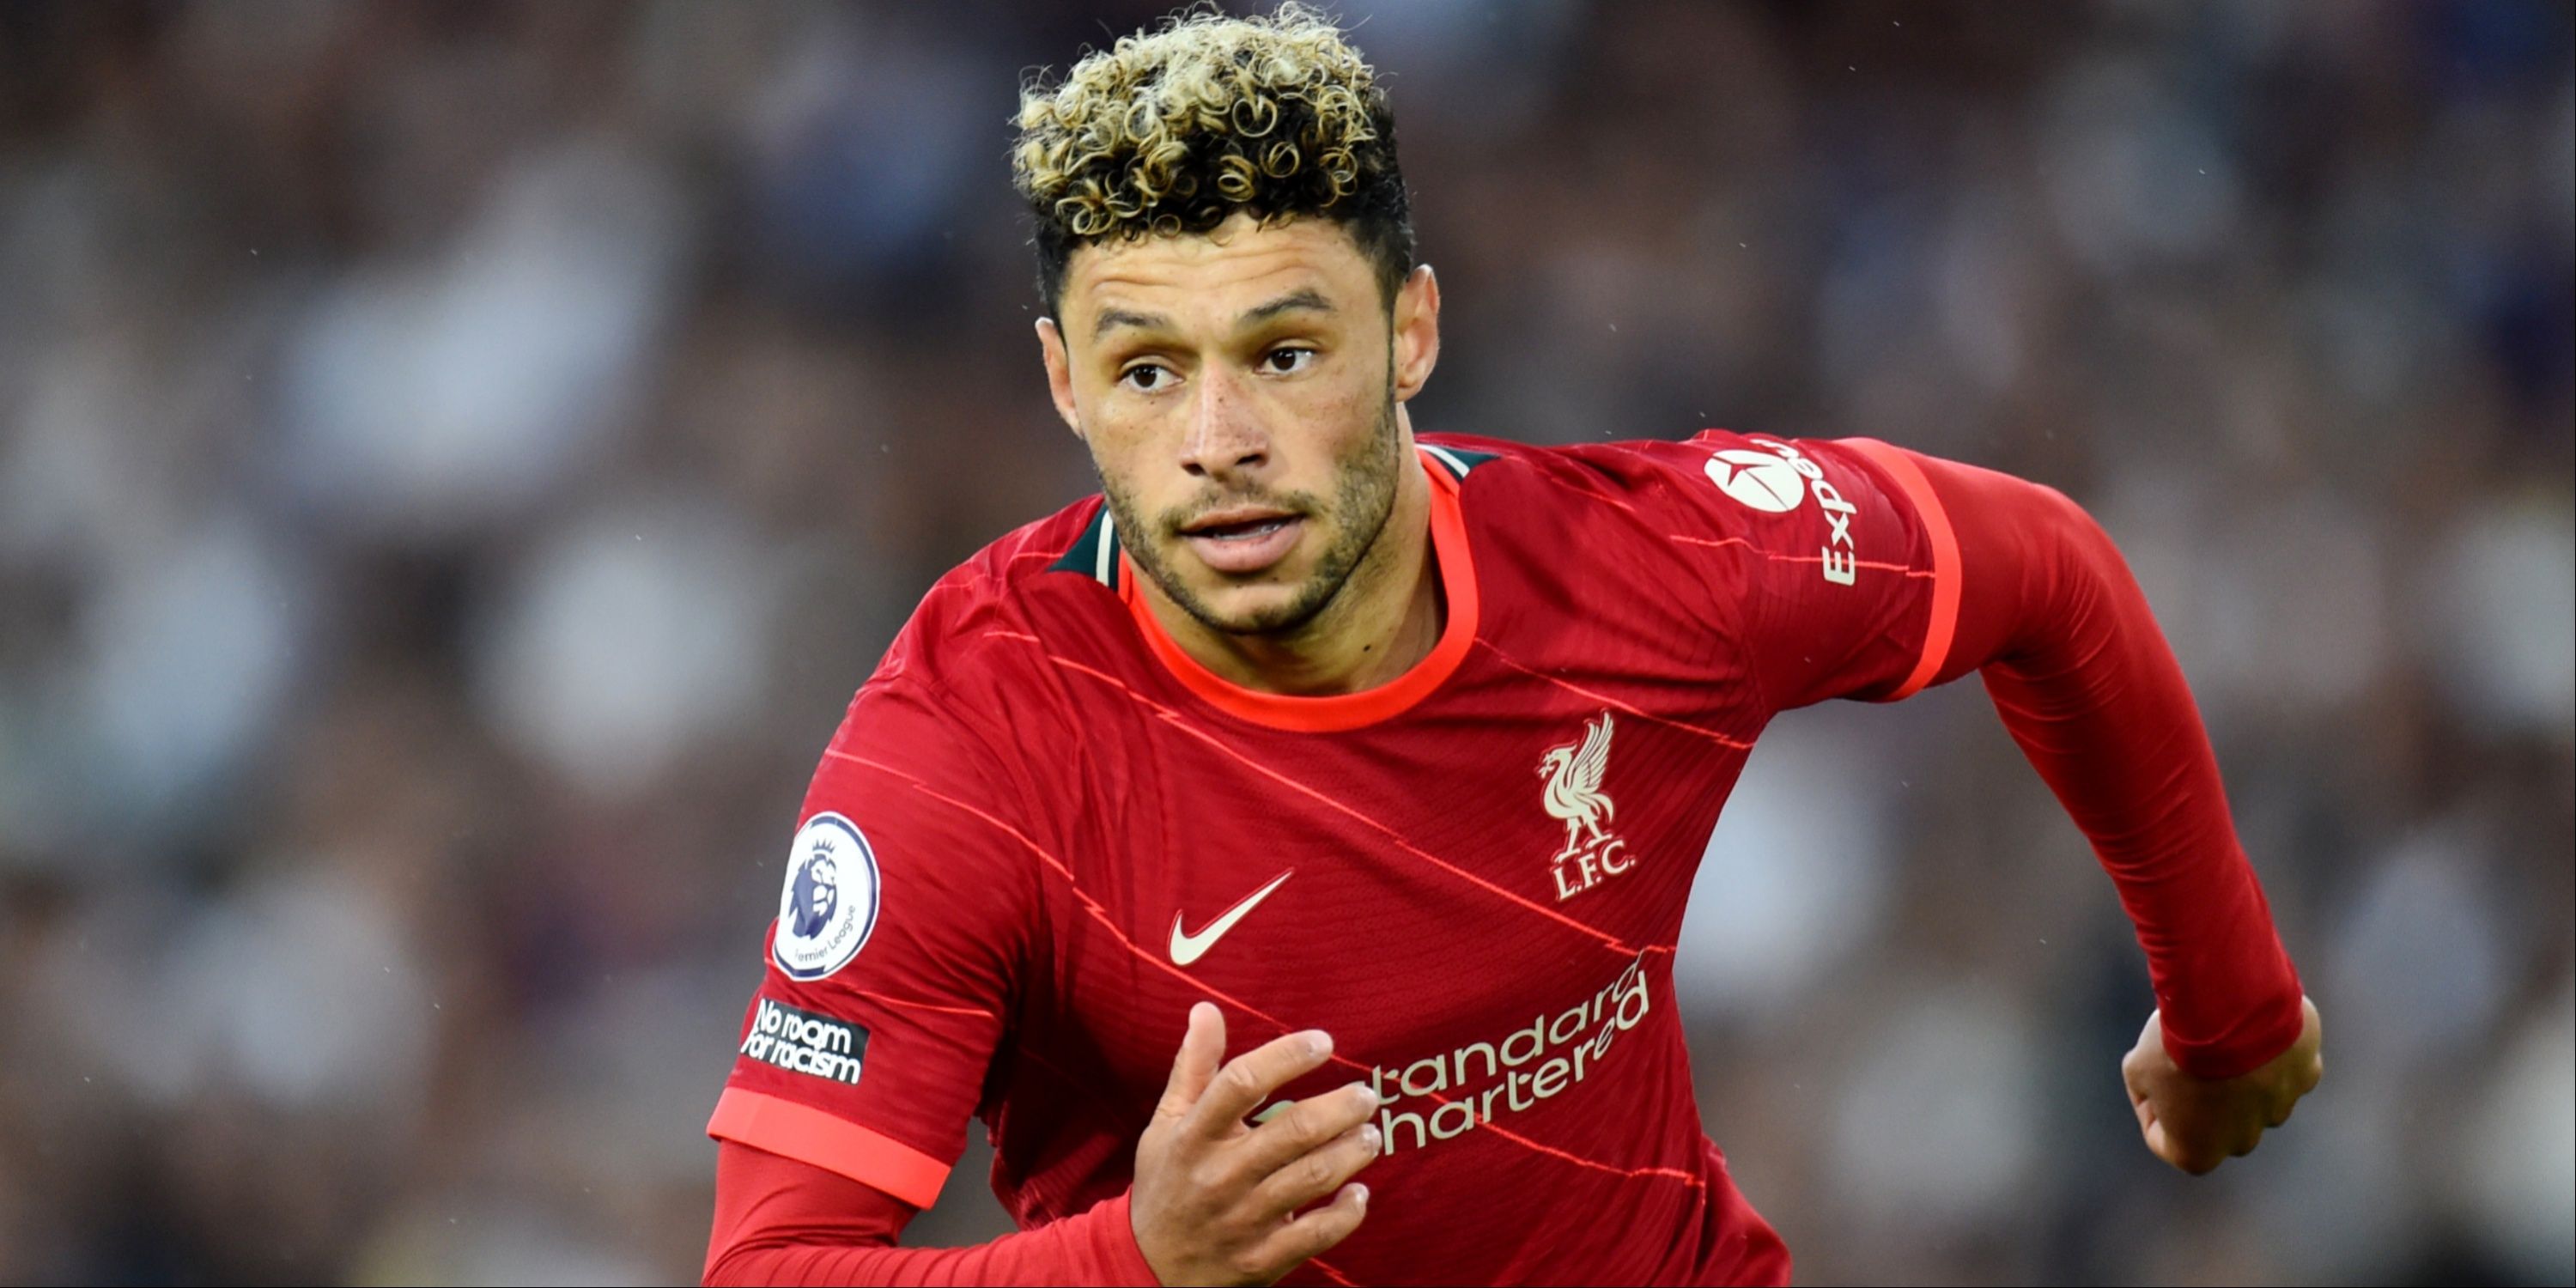 Alex Oxlade-Chamberlain in action for Liverpool